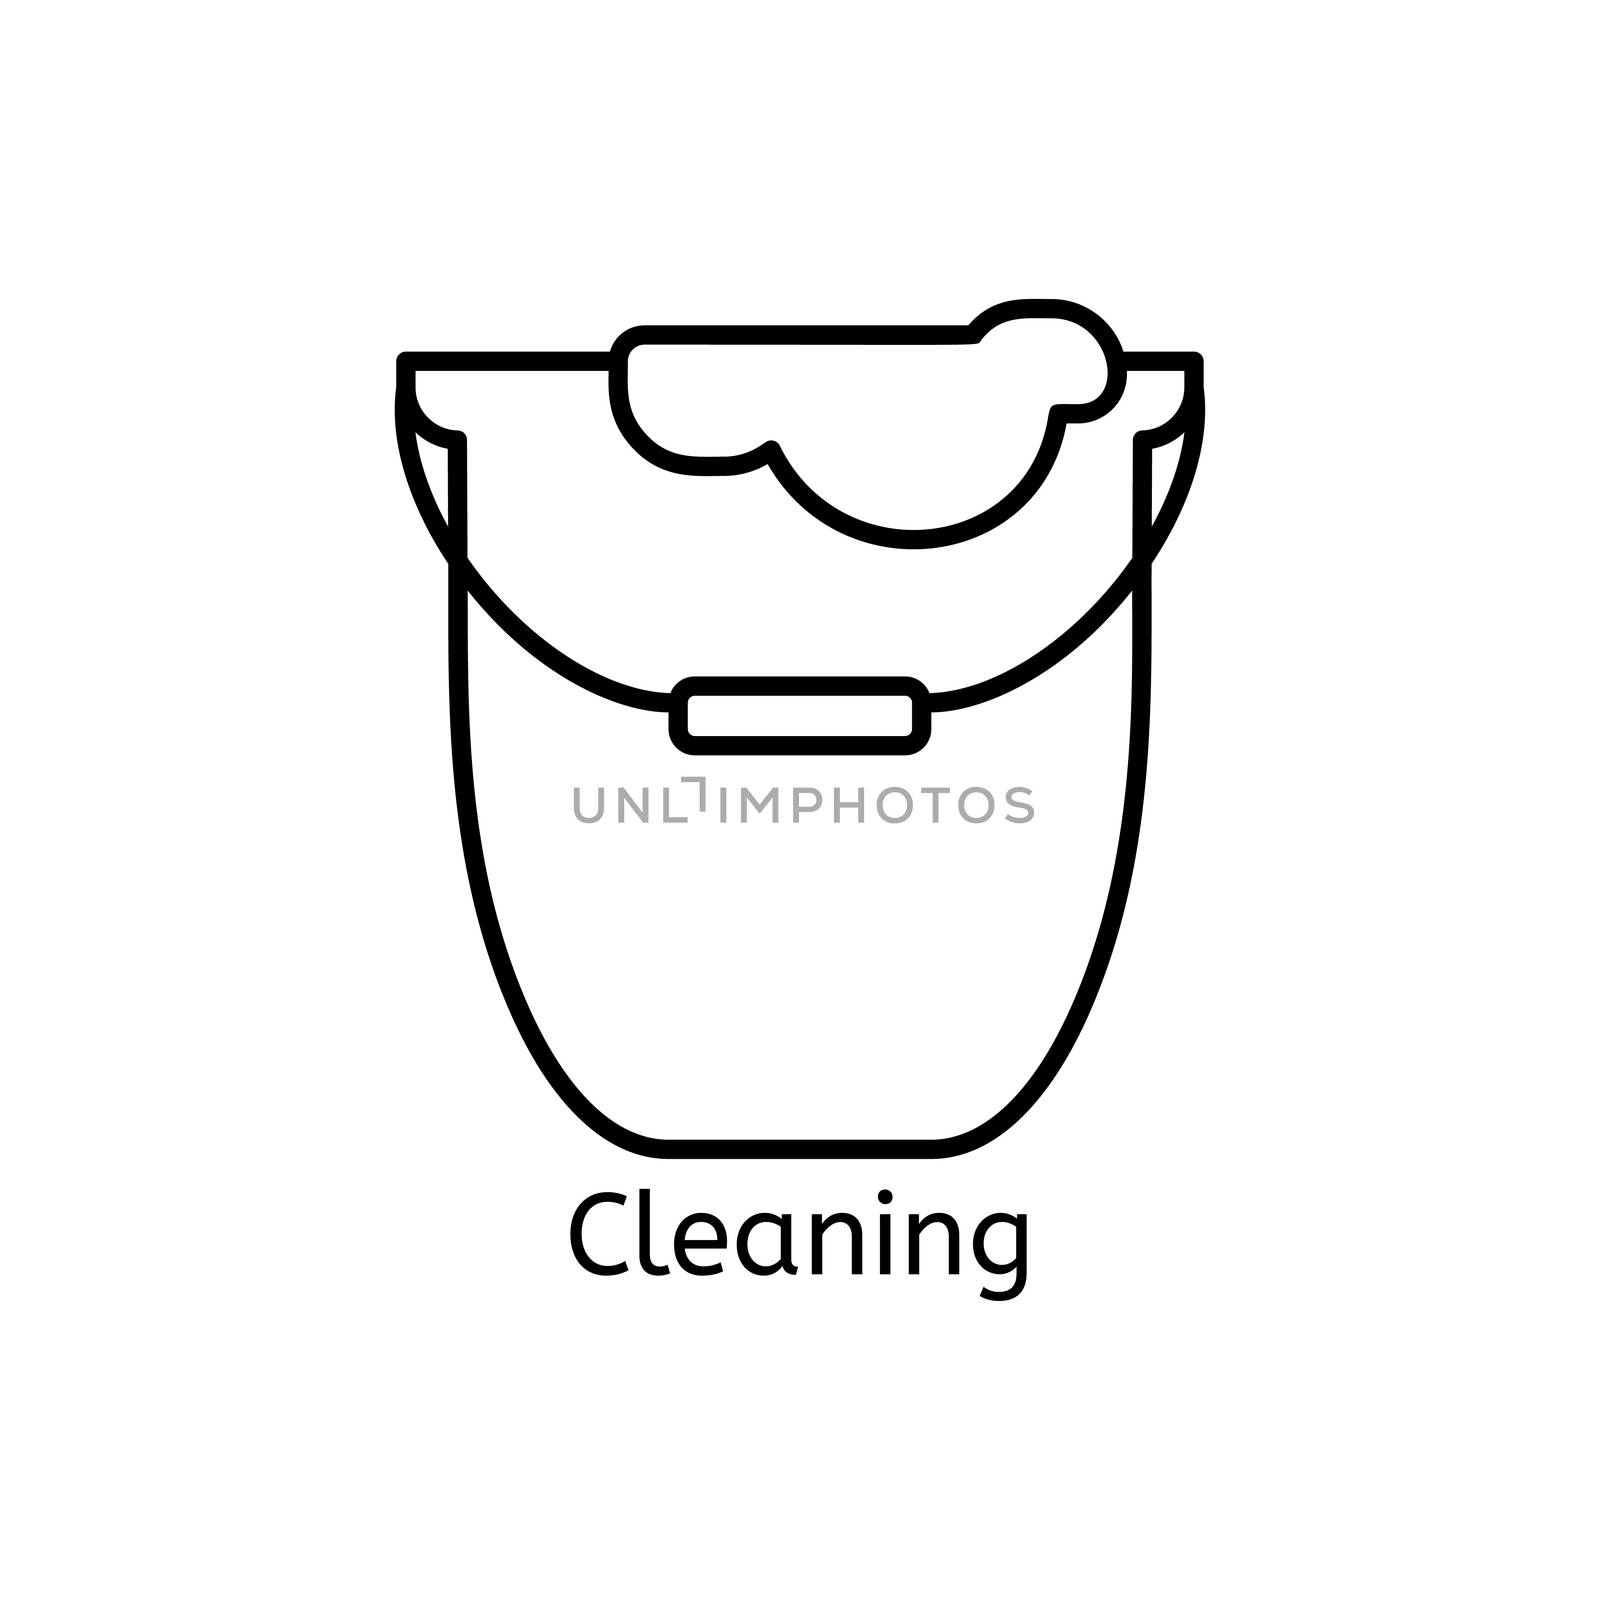 Cleaning simple line icon. Wash thin linear signs. Washing floors simple concept for websites, infographic, mobile app.